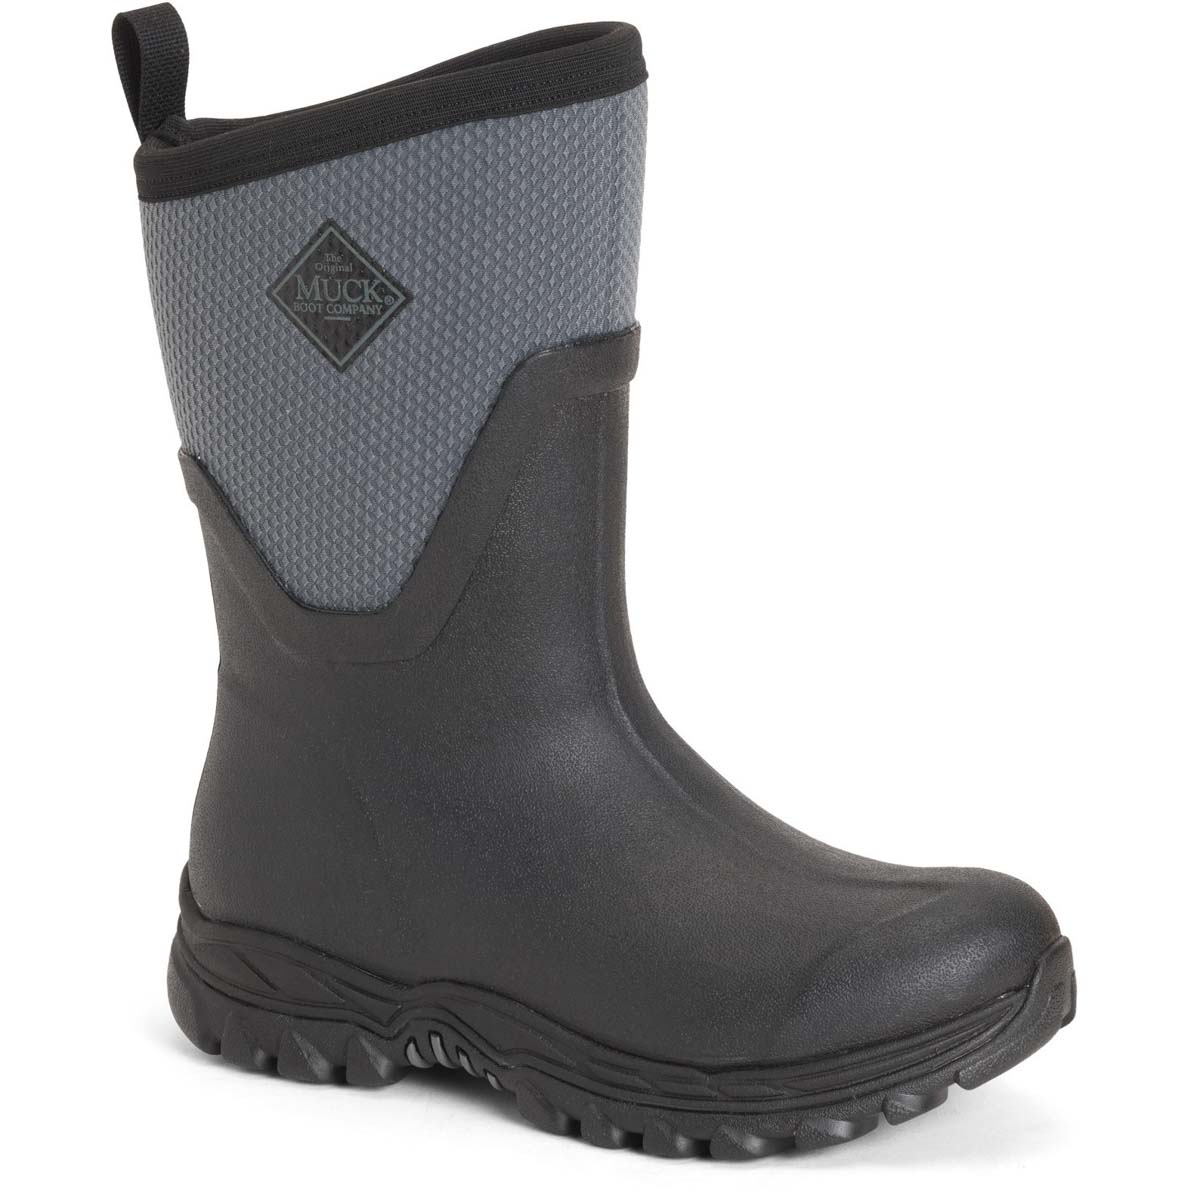 Muck Boots Arctic Sport Mid Black Womens Wellingtons AS2M-101-BLK in a Plain Man-made in Size 6